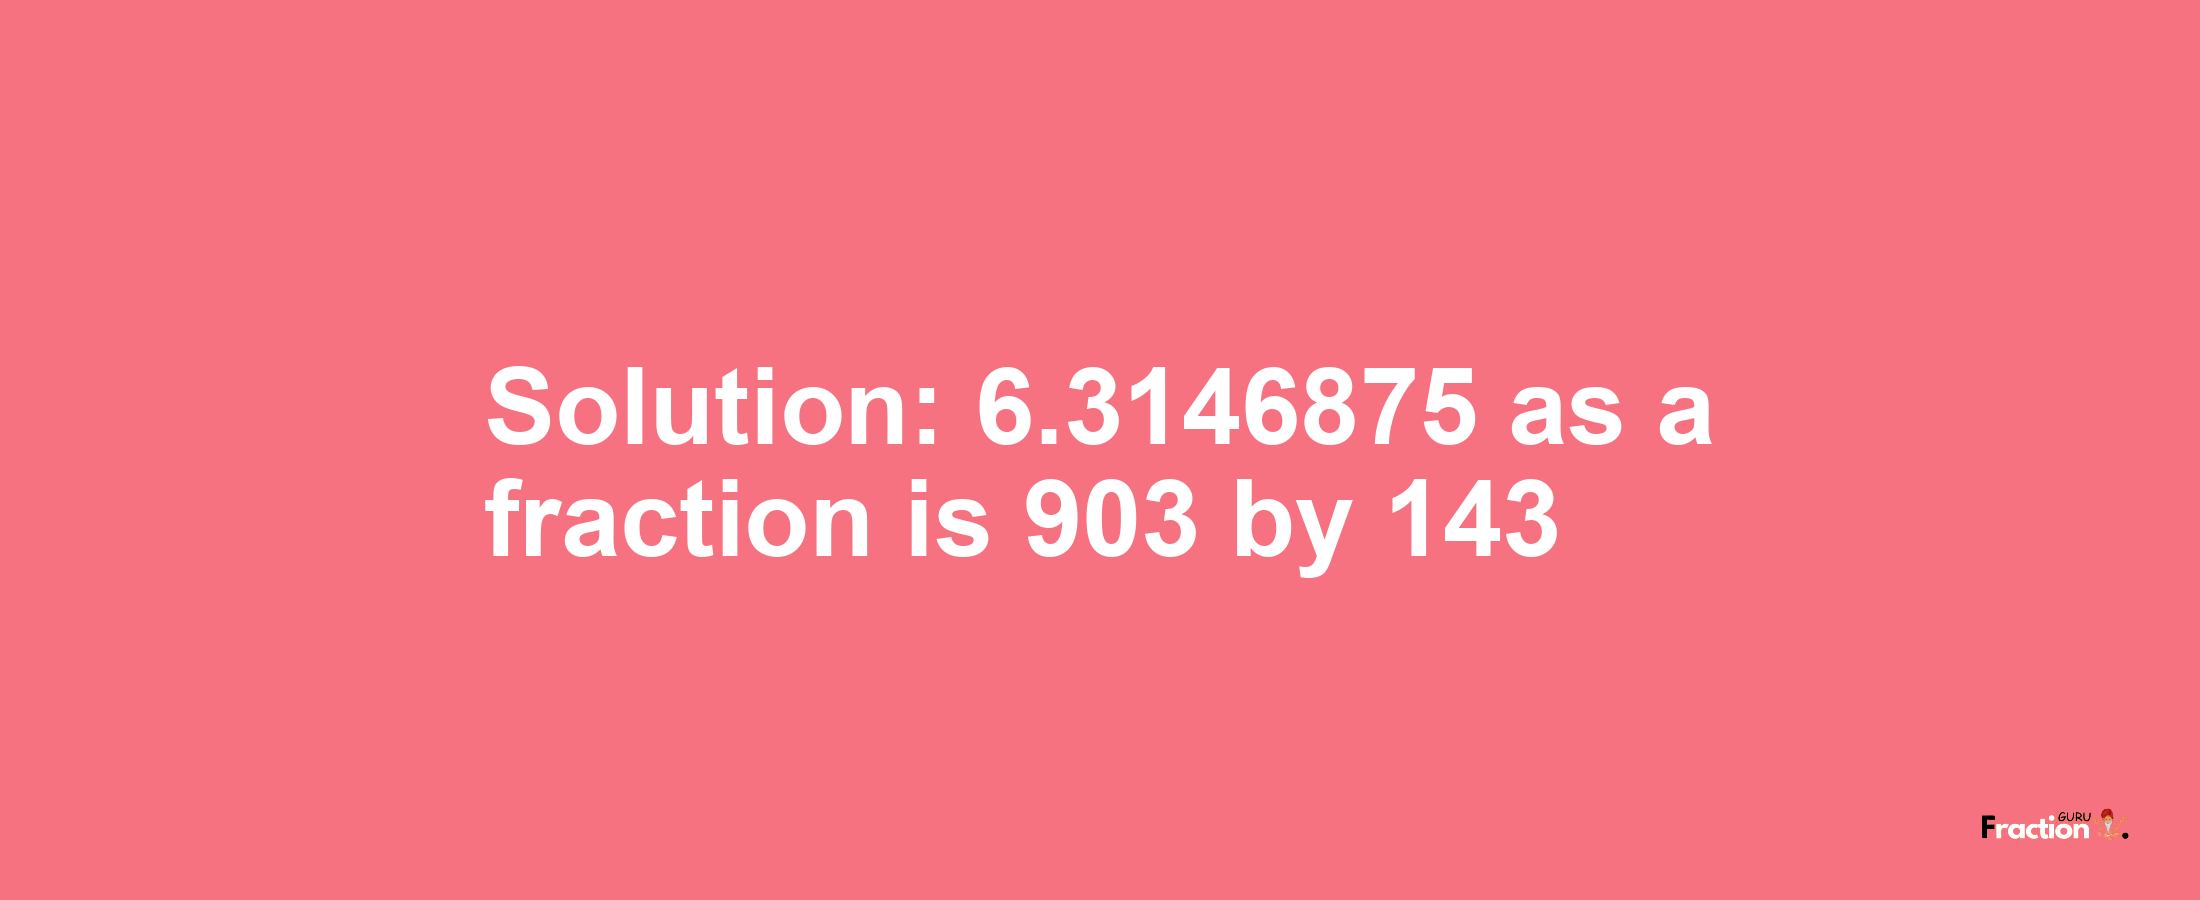 Solution:6.3146875 as a fraction is 903/143